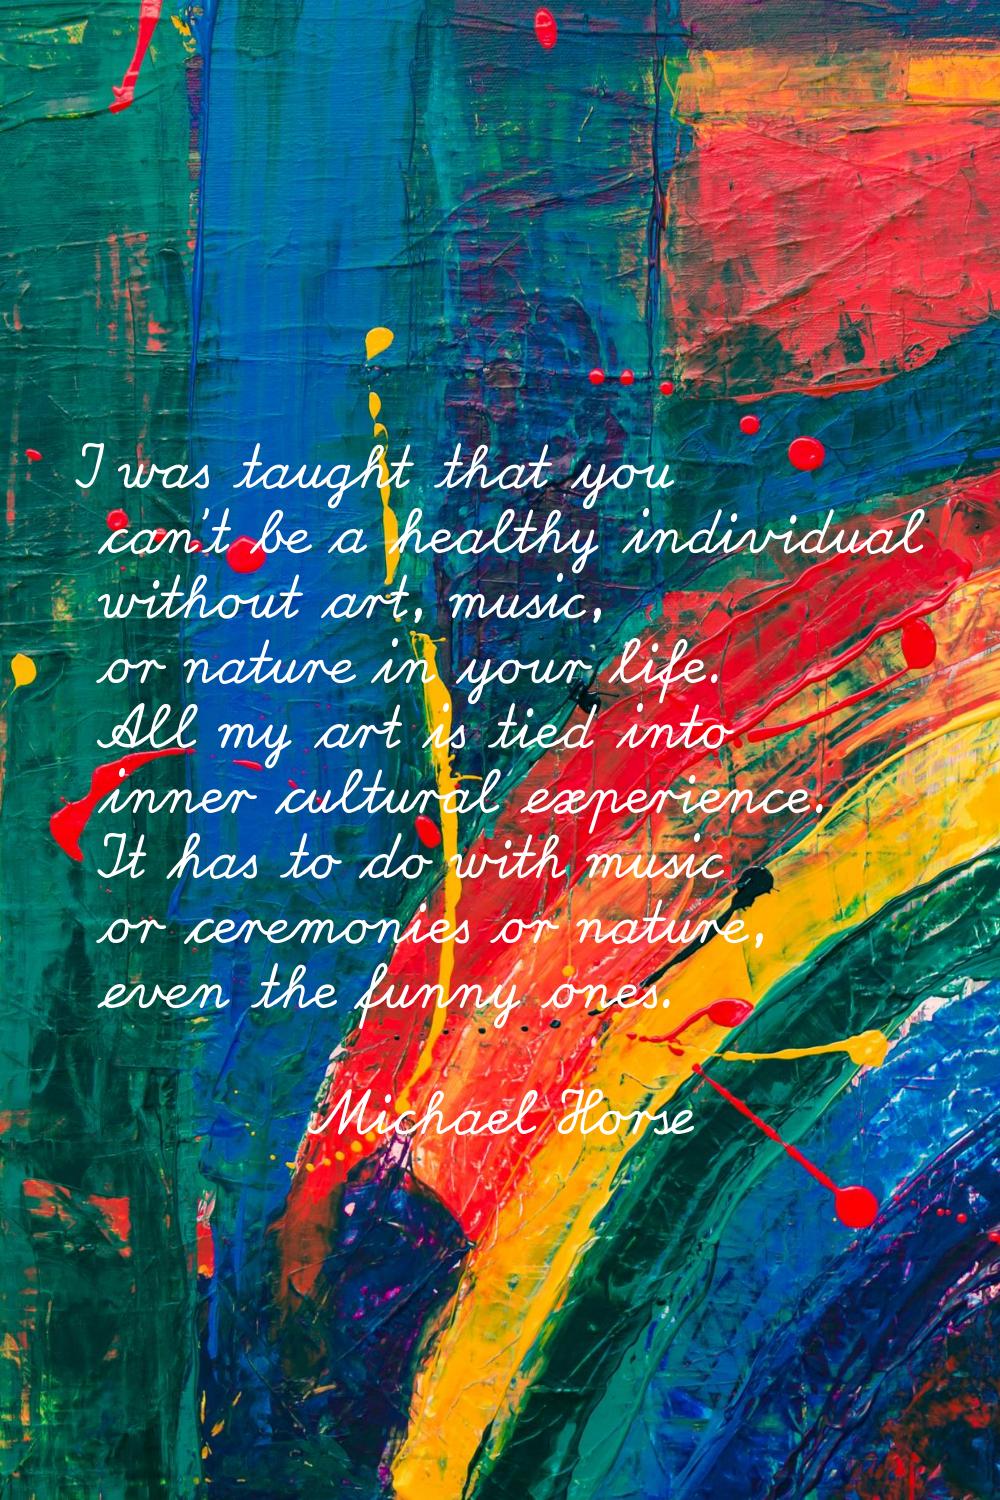 I was taught that you can't be a healthy individual without art, music, or nature in your life. All